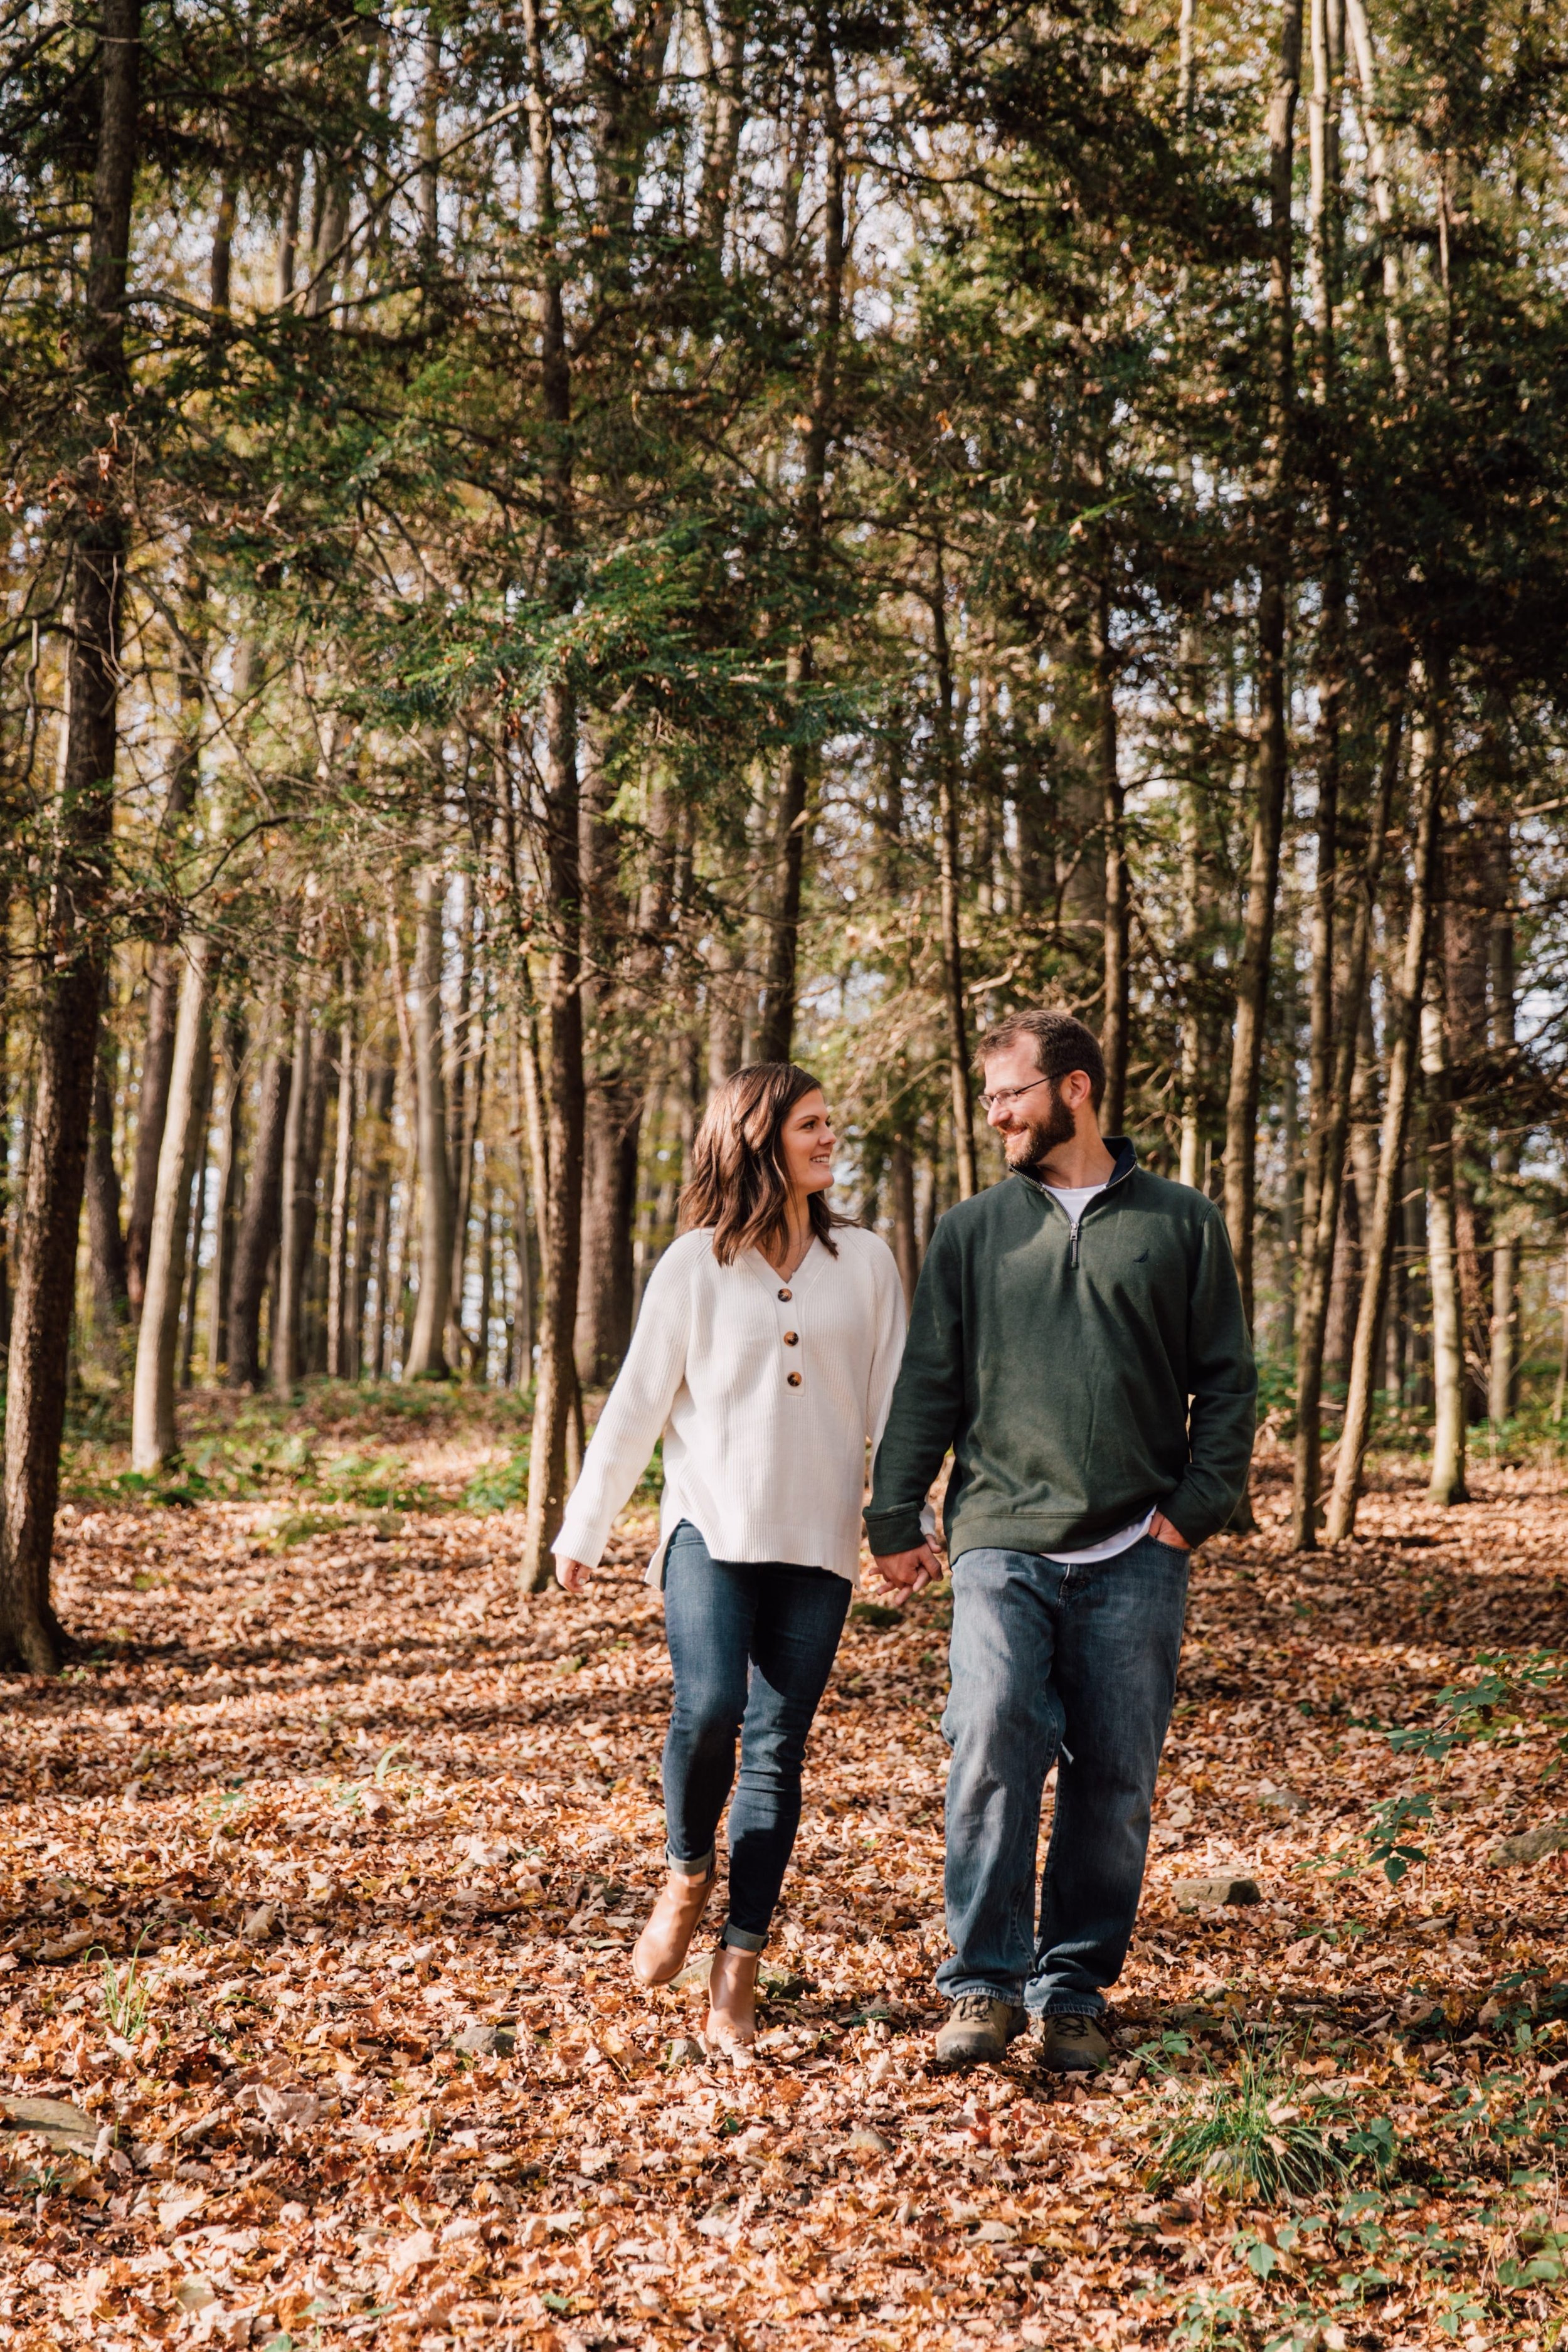  megan and barrett walk hand in hand around their forest property while wearing fall sweaters and jeans during their backyard photoshoot 